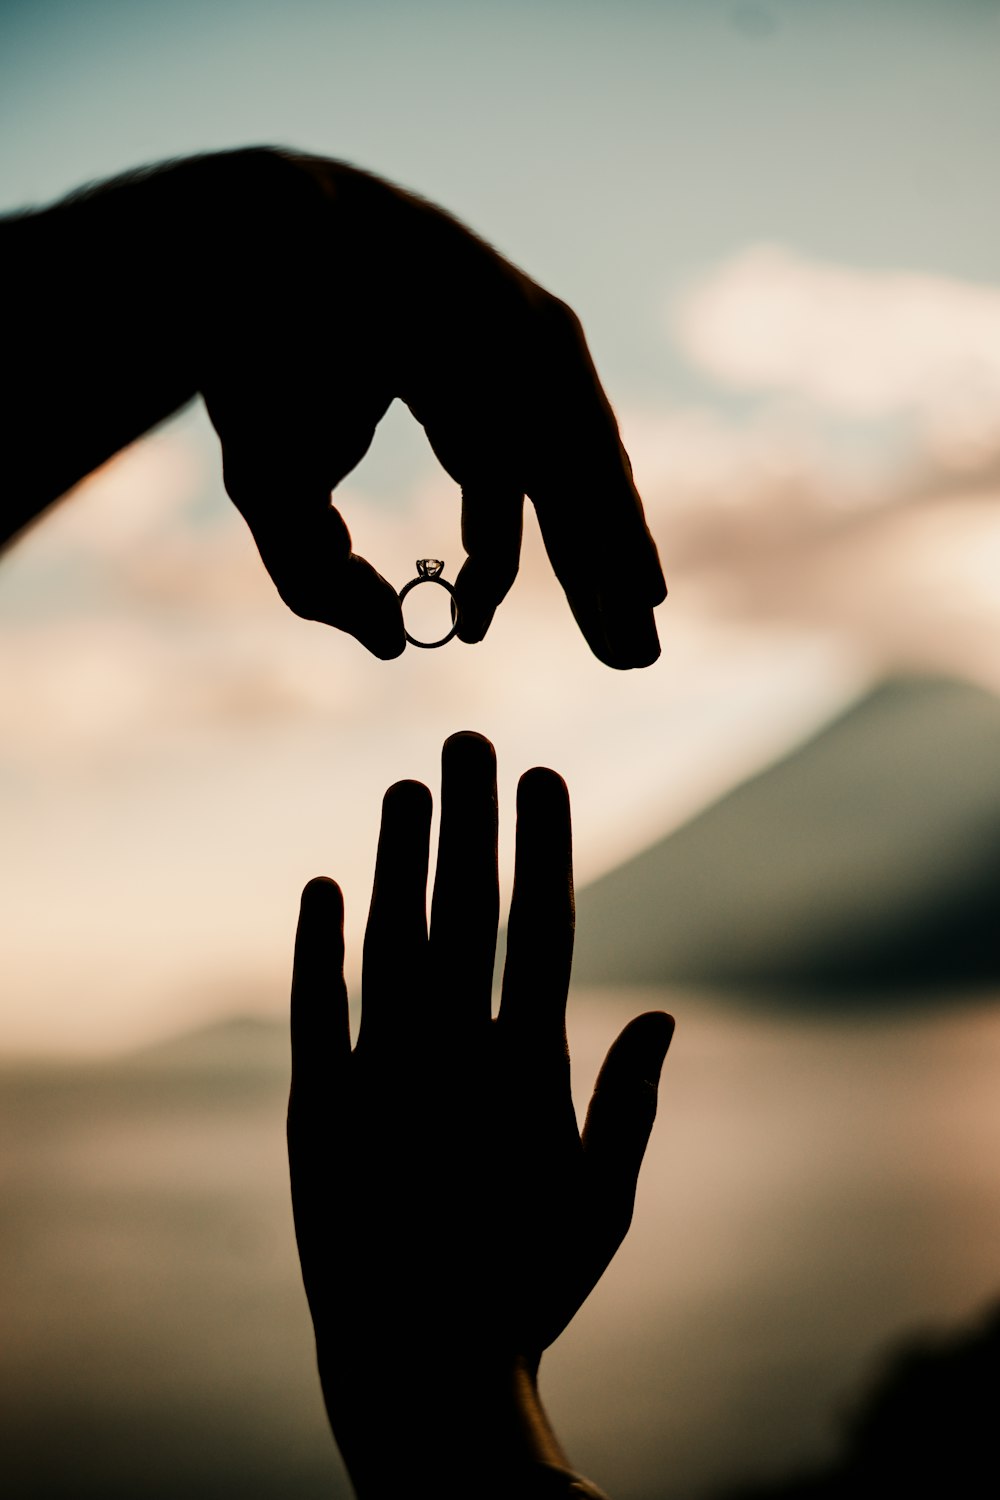 a person holding a ring in their hand